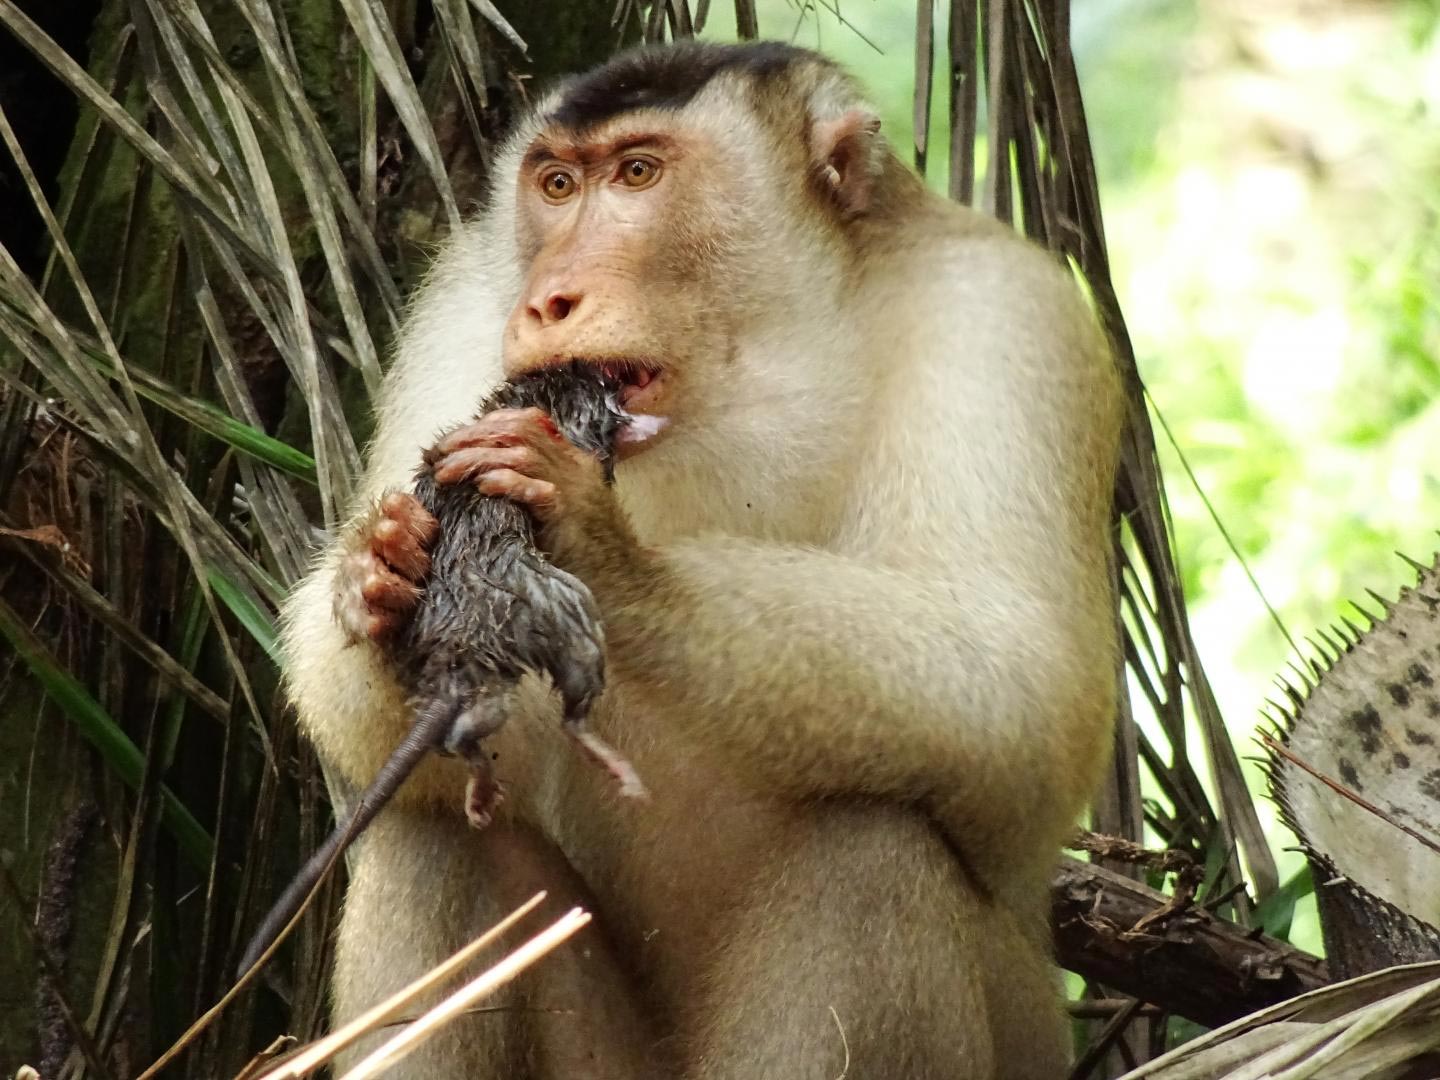 Pig-Tailed-Macaque-Consuming-Rat.jpg